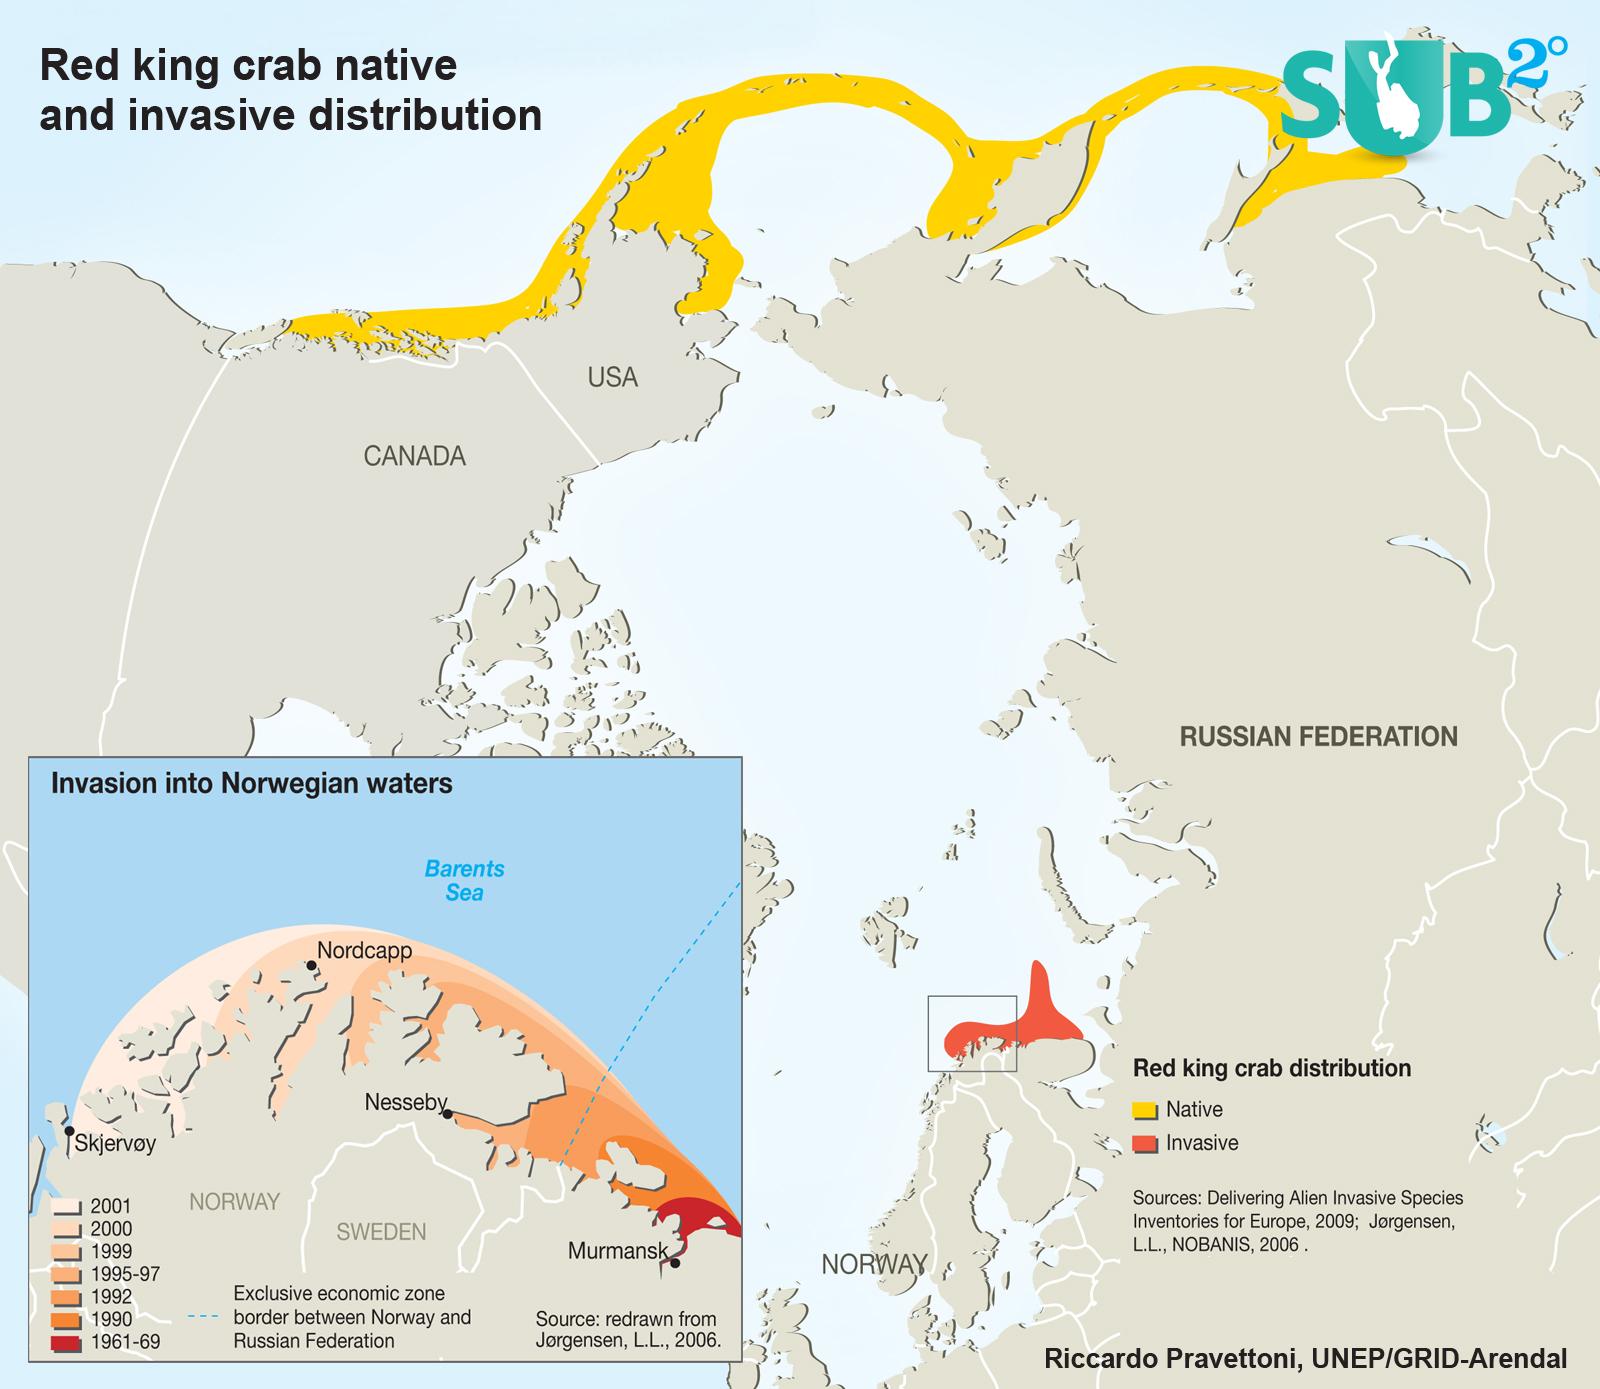 The map shows the distribution of red king crab, both native and invasive.